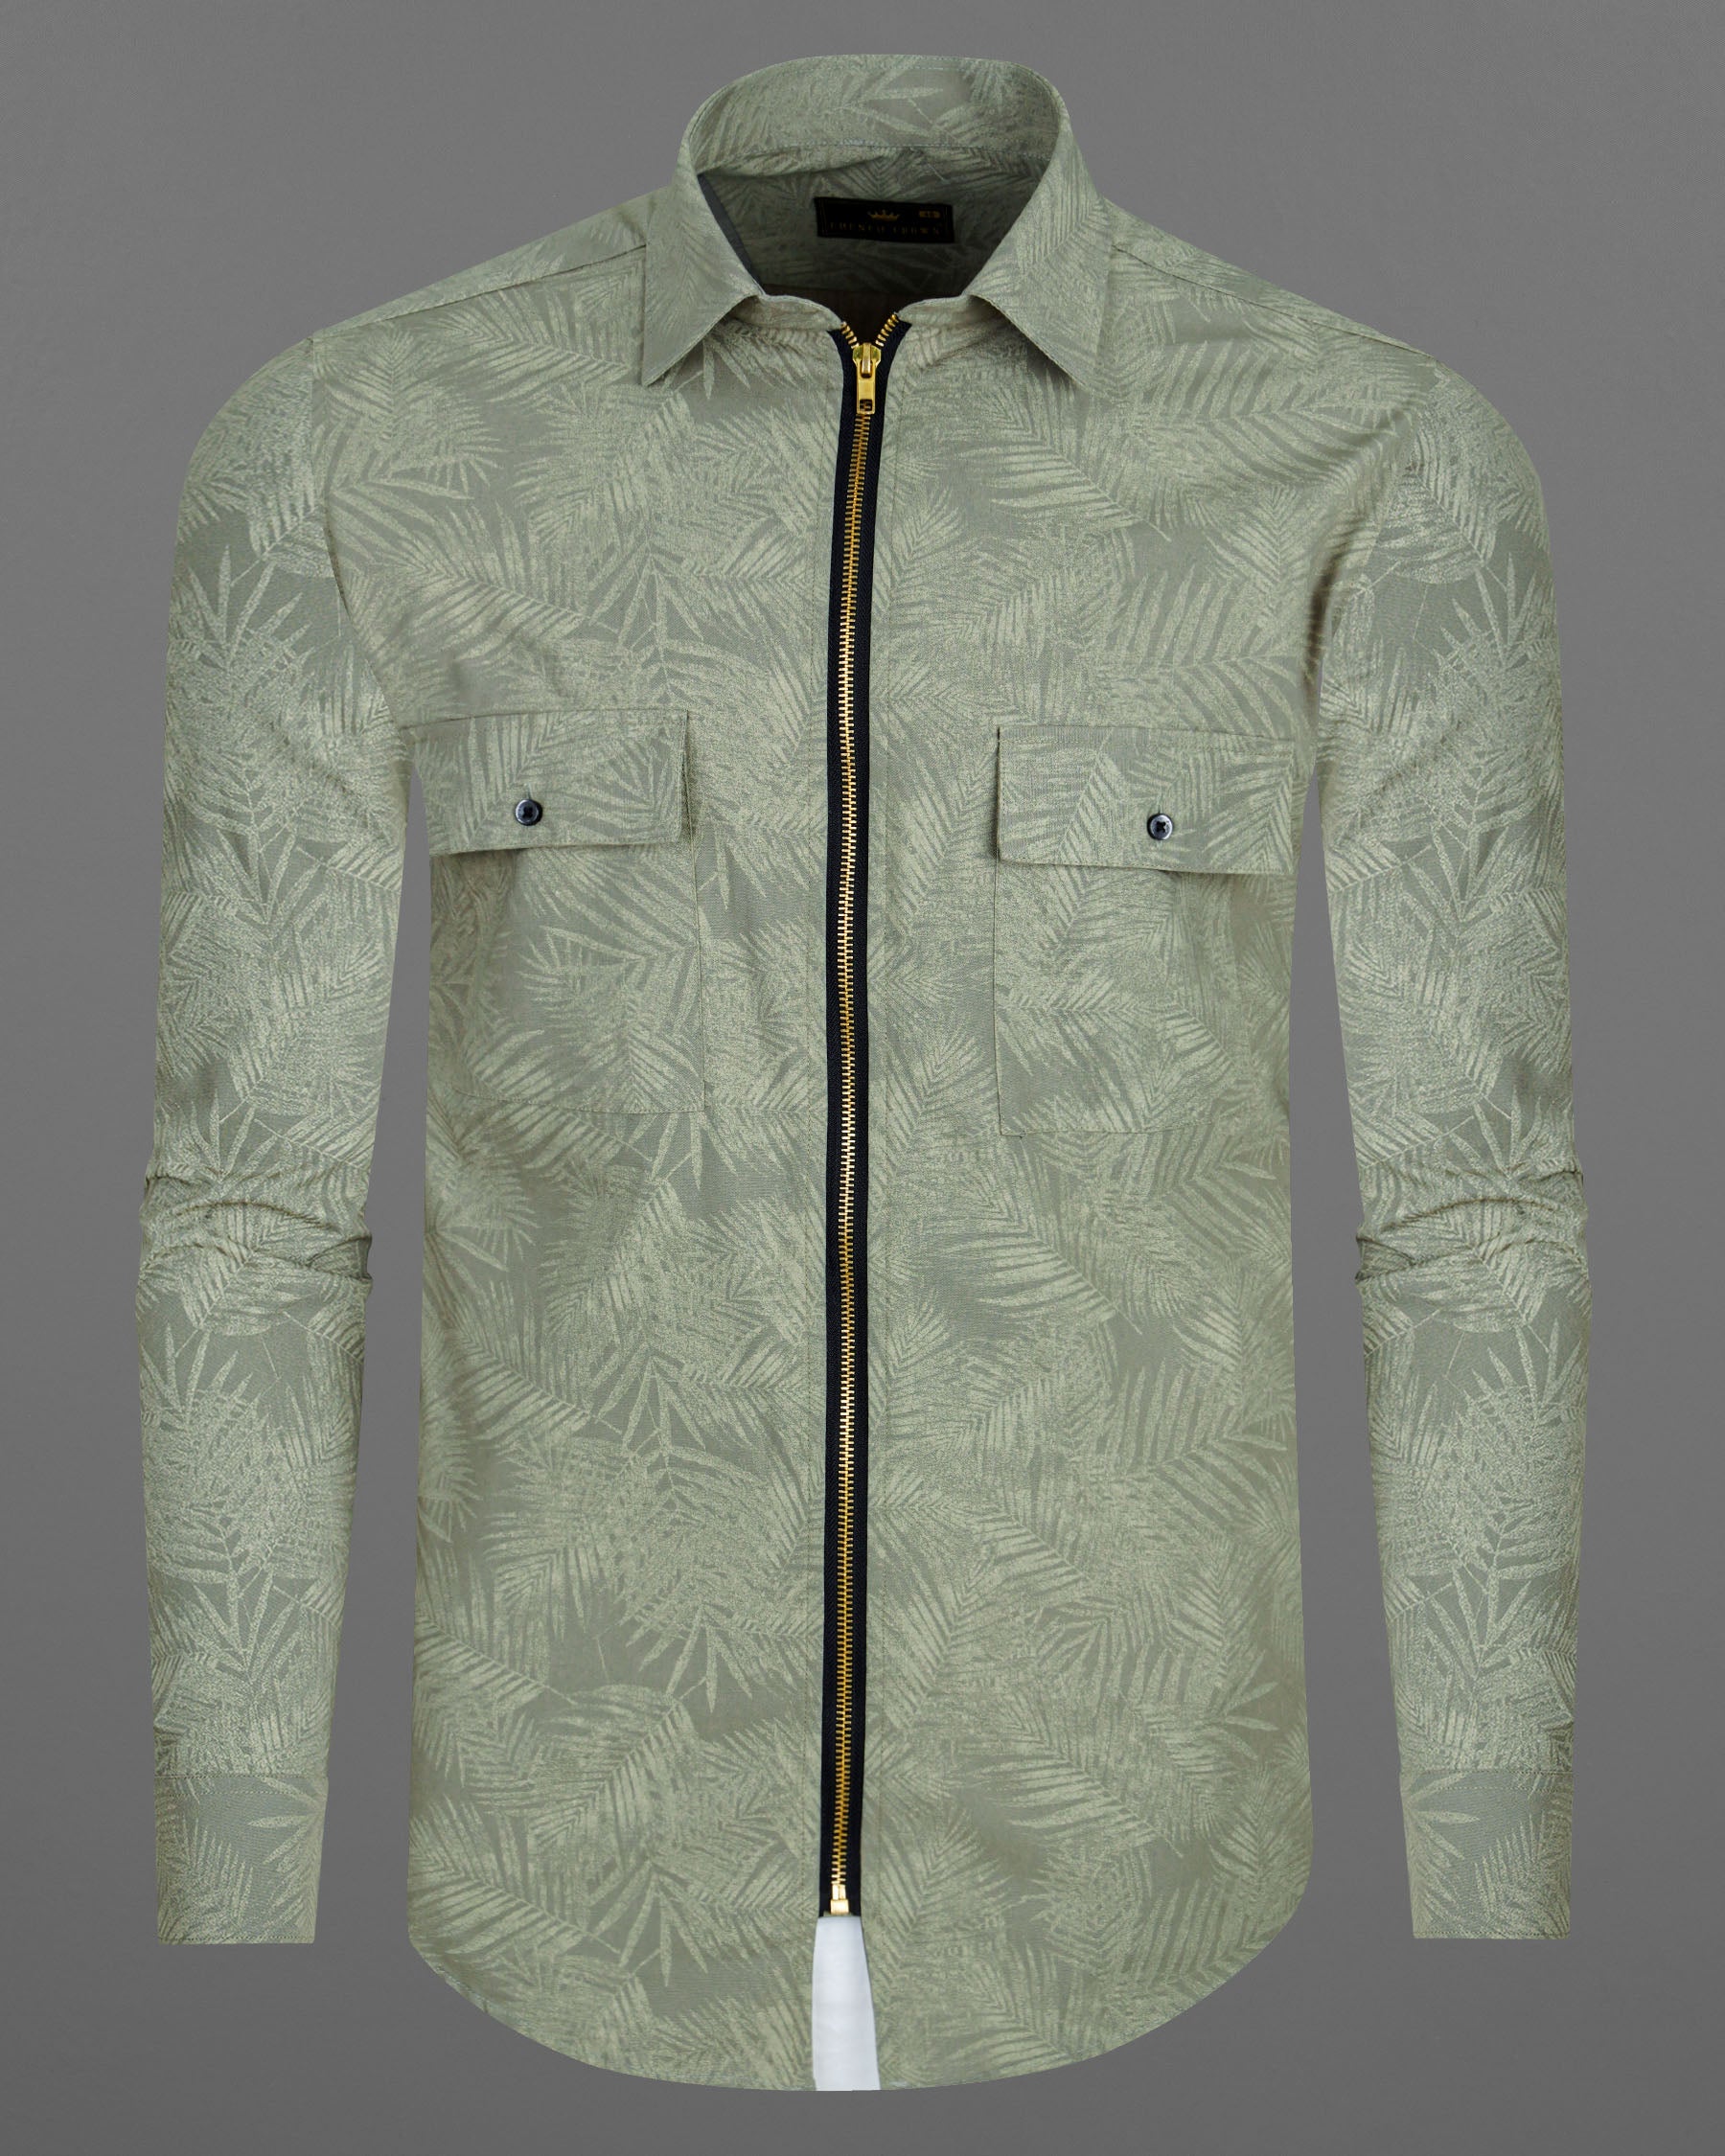 Cement Green Leaves Printed Royal Oxford Zipper Designer Overshirt 7715-OS-P181-38, 7715-OS-P181-39, 7715-OS-P181-40, 7715-OS-P181-42, 7715-OS-P181-44, 7715-OS-P181-46, 7715-OS-P181-48, 7715-OS-P181-50, 7715-OS-P181-52